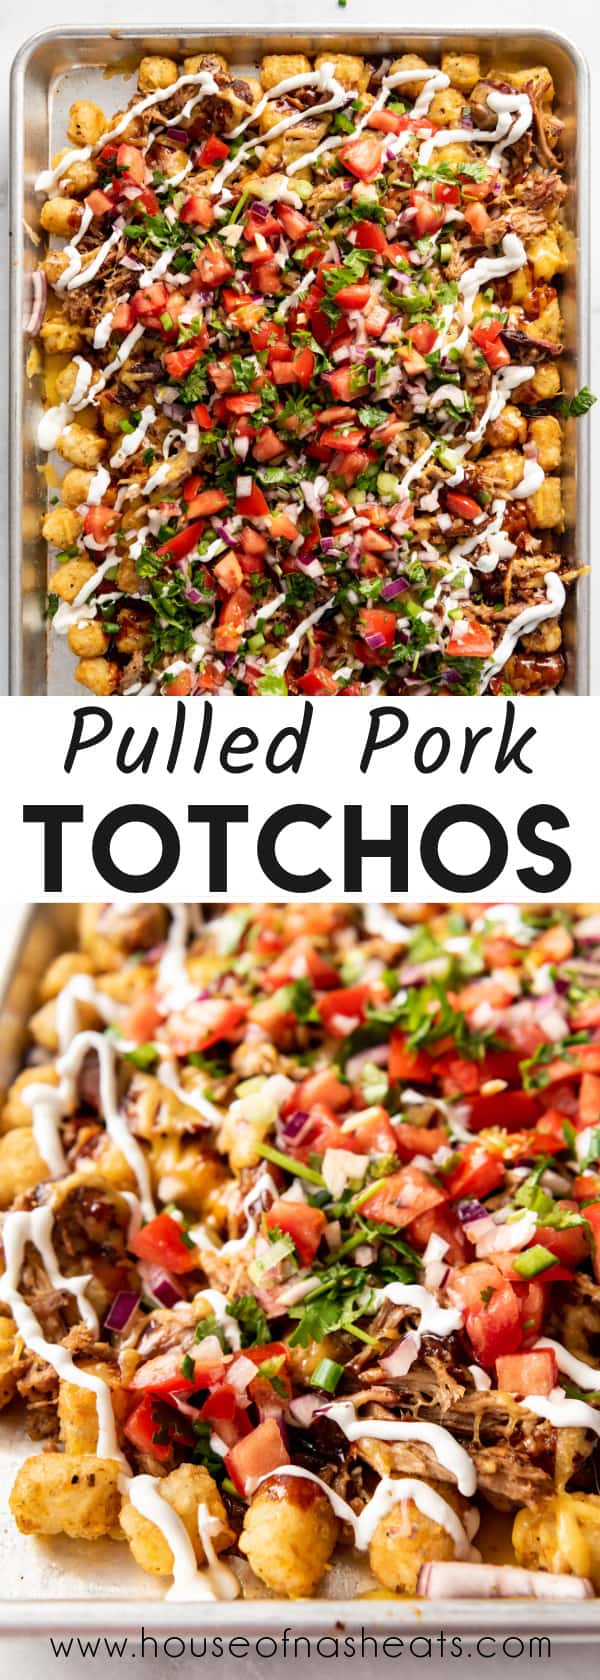 A collage of images of pulled pork totchos with text overlay.